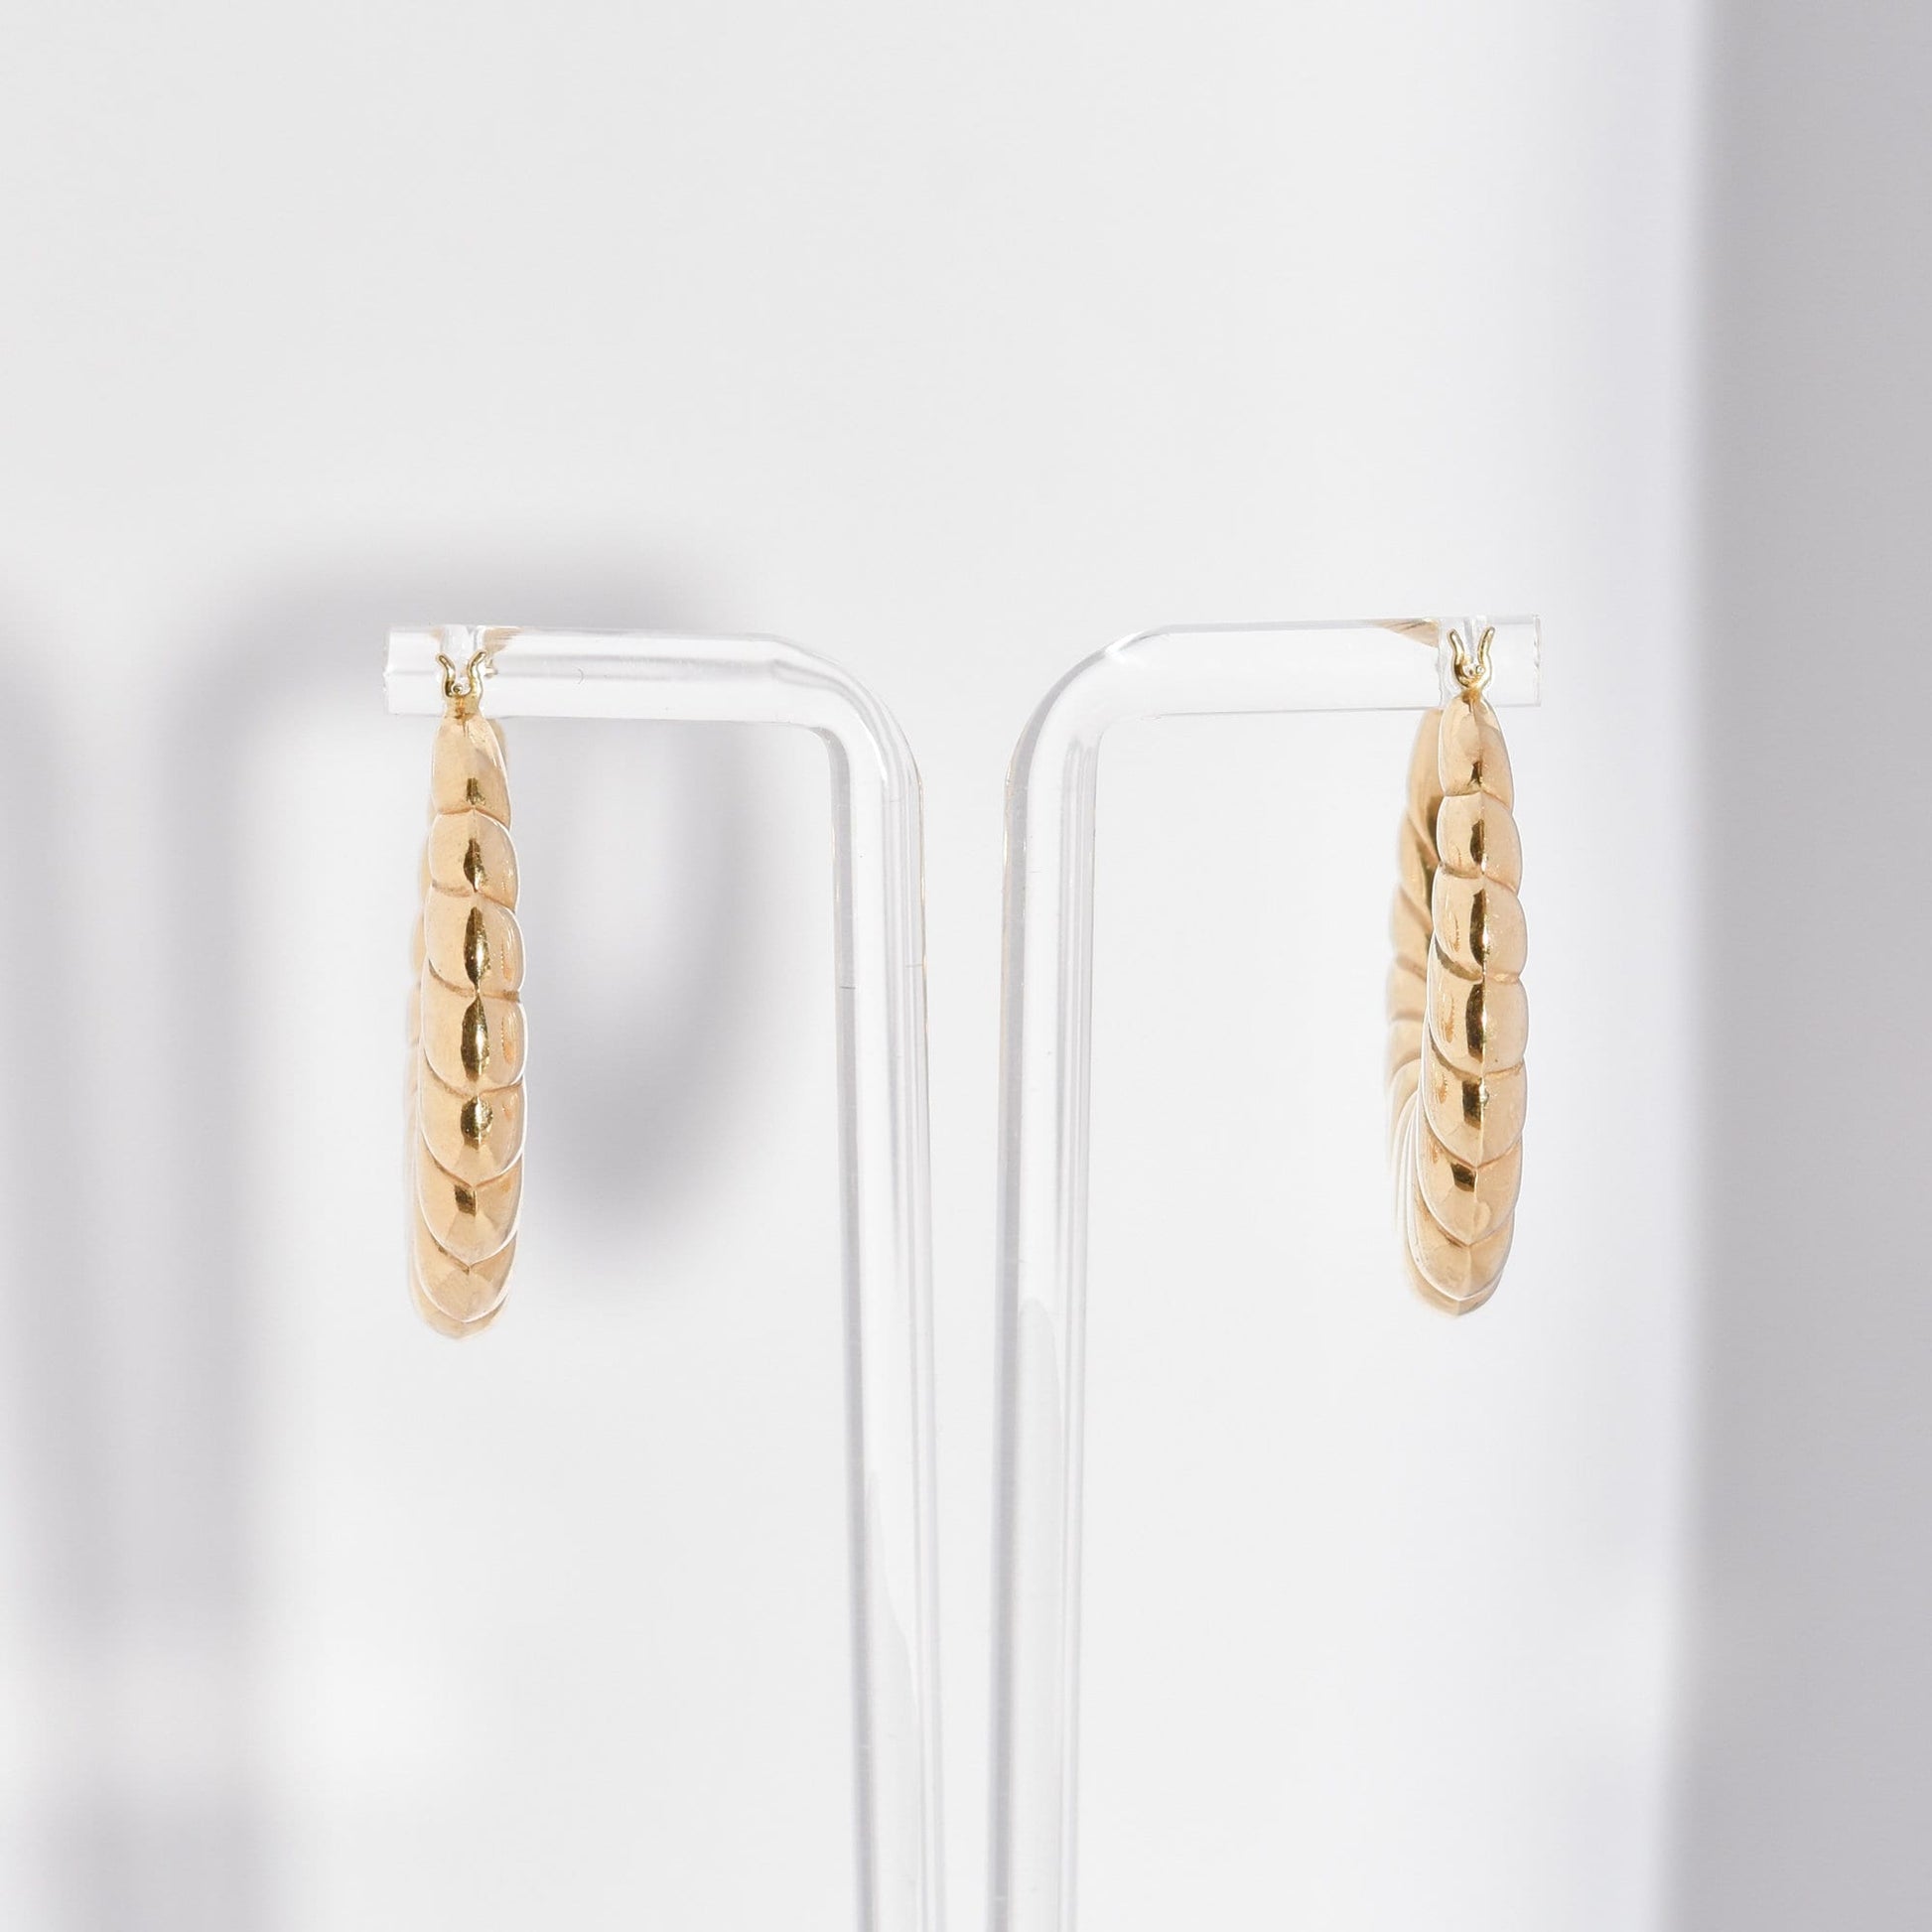 MCM 14K yellow gold puffed scallop hoop earrings, medium size, displayed on a white background, 36mm estate jewelry.